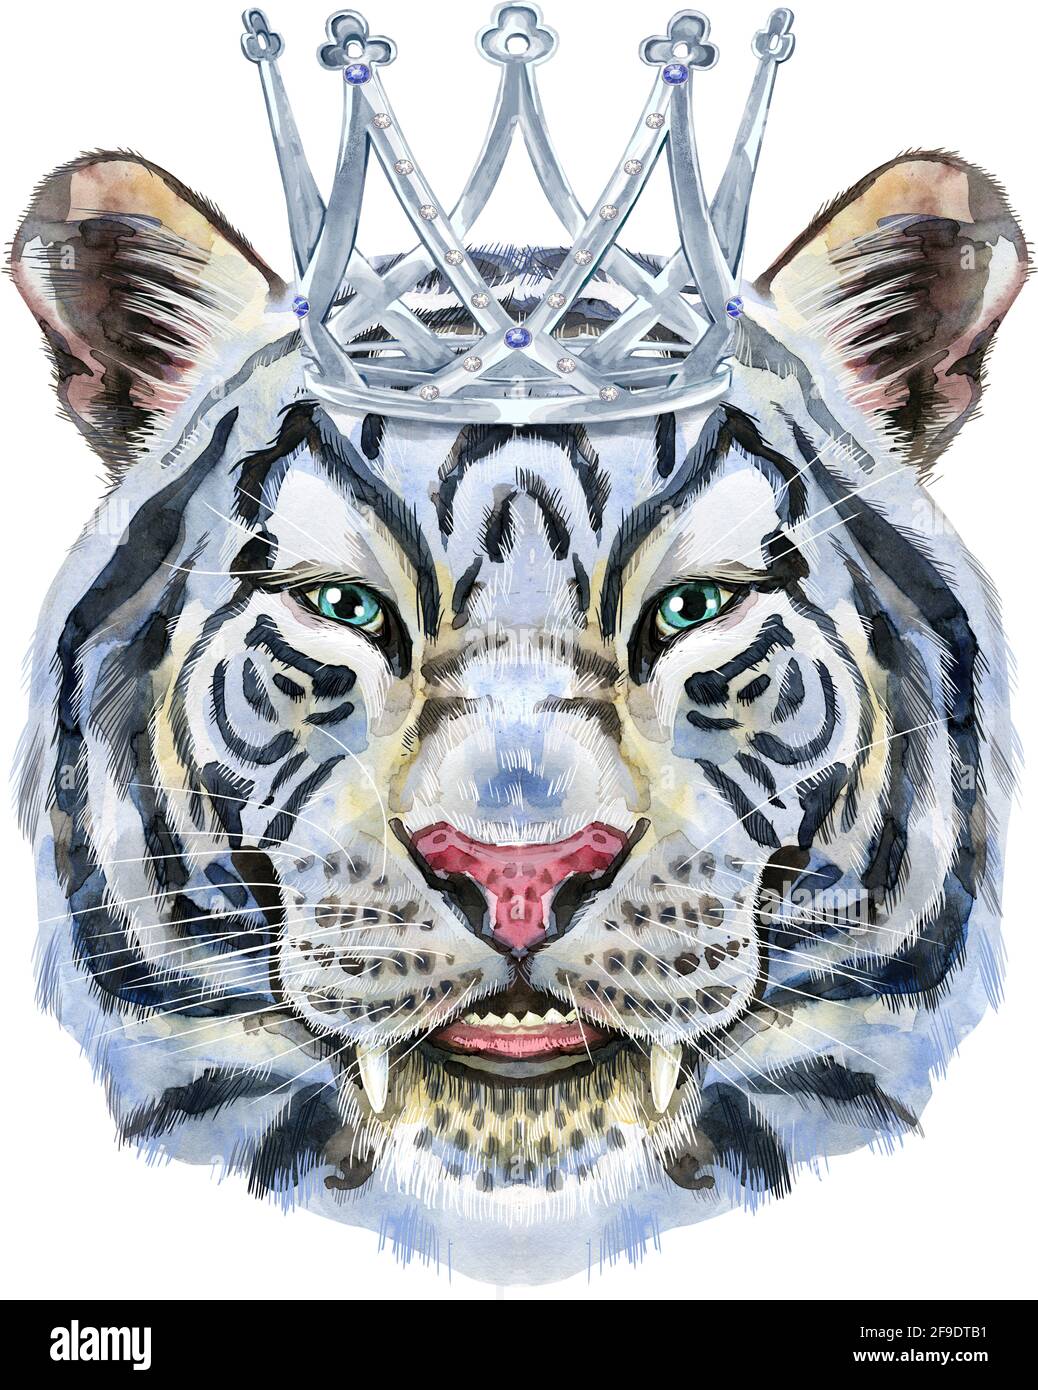 Watercolor illustration of white smiling tiger with silver crown. Stock Photo